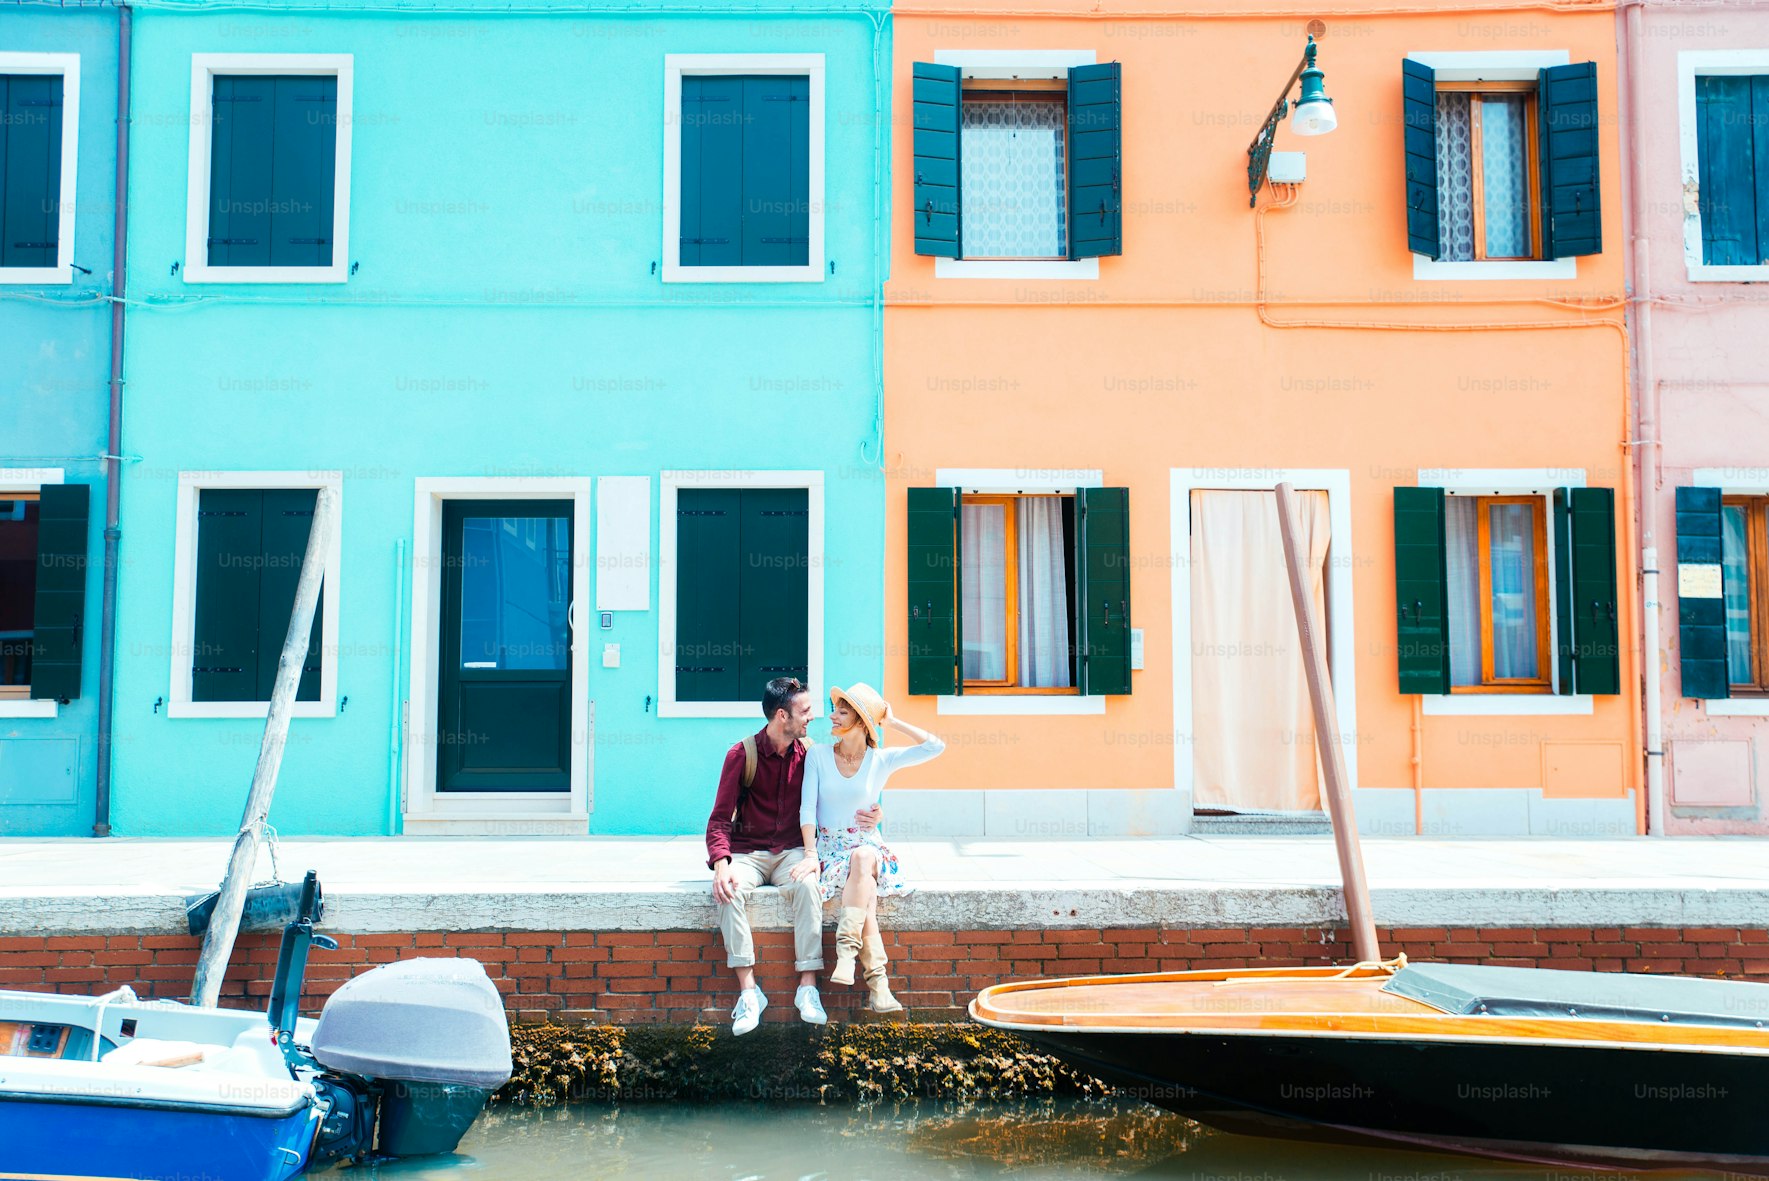 Romantic Venice Getaway: 5 Must-See Attractions for Couples